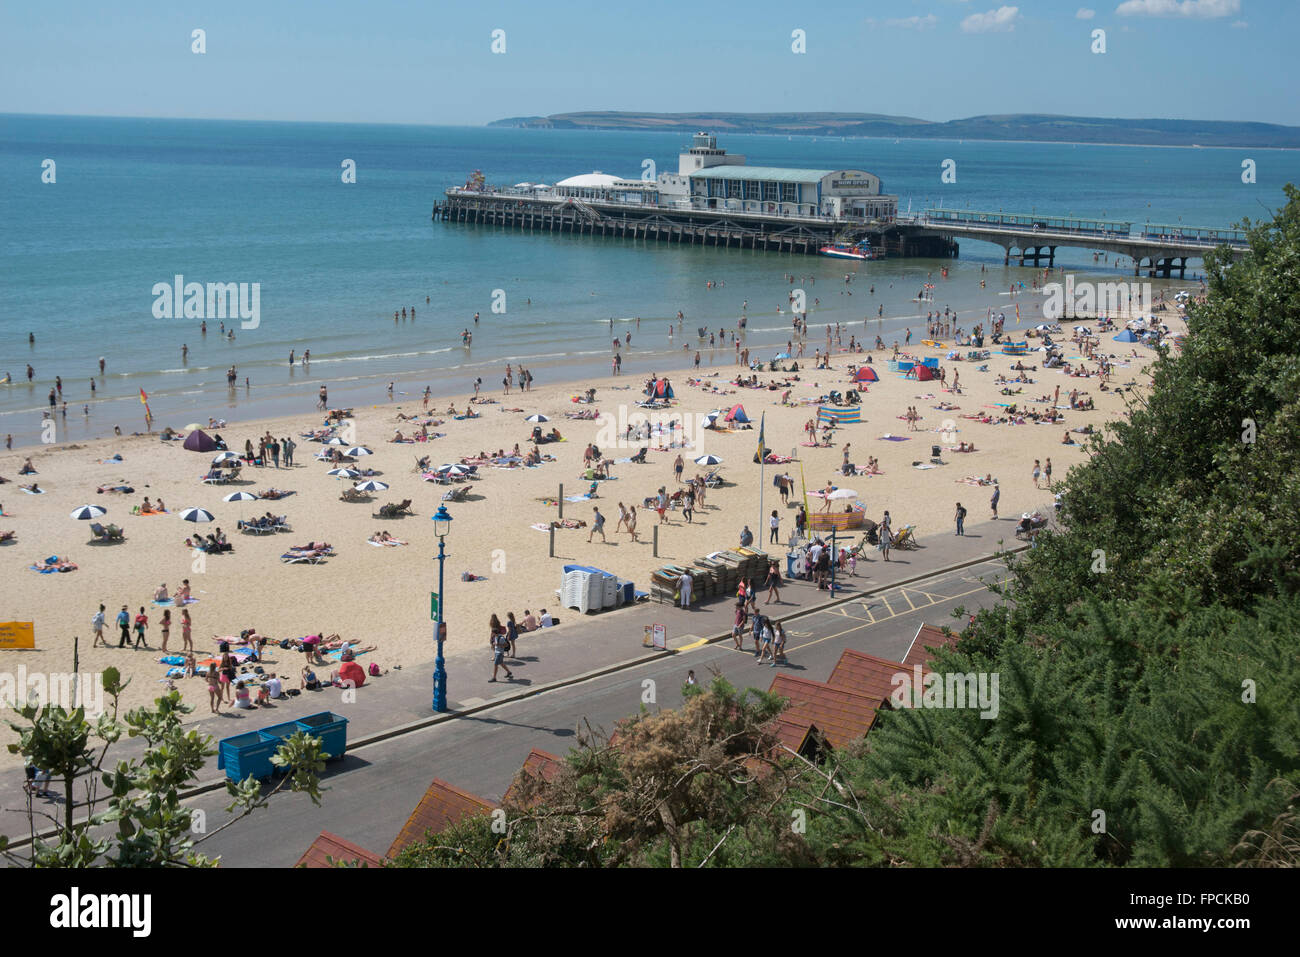 A view from above of the beach filled with people, the pier can be seen in the distance. Stock Photo